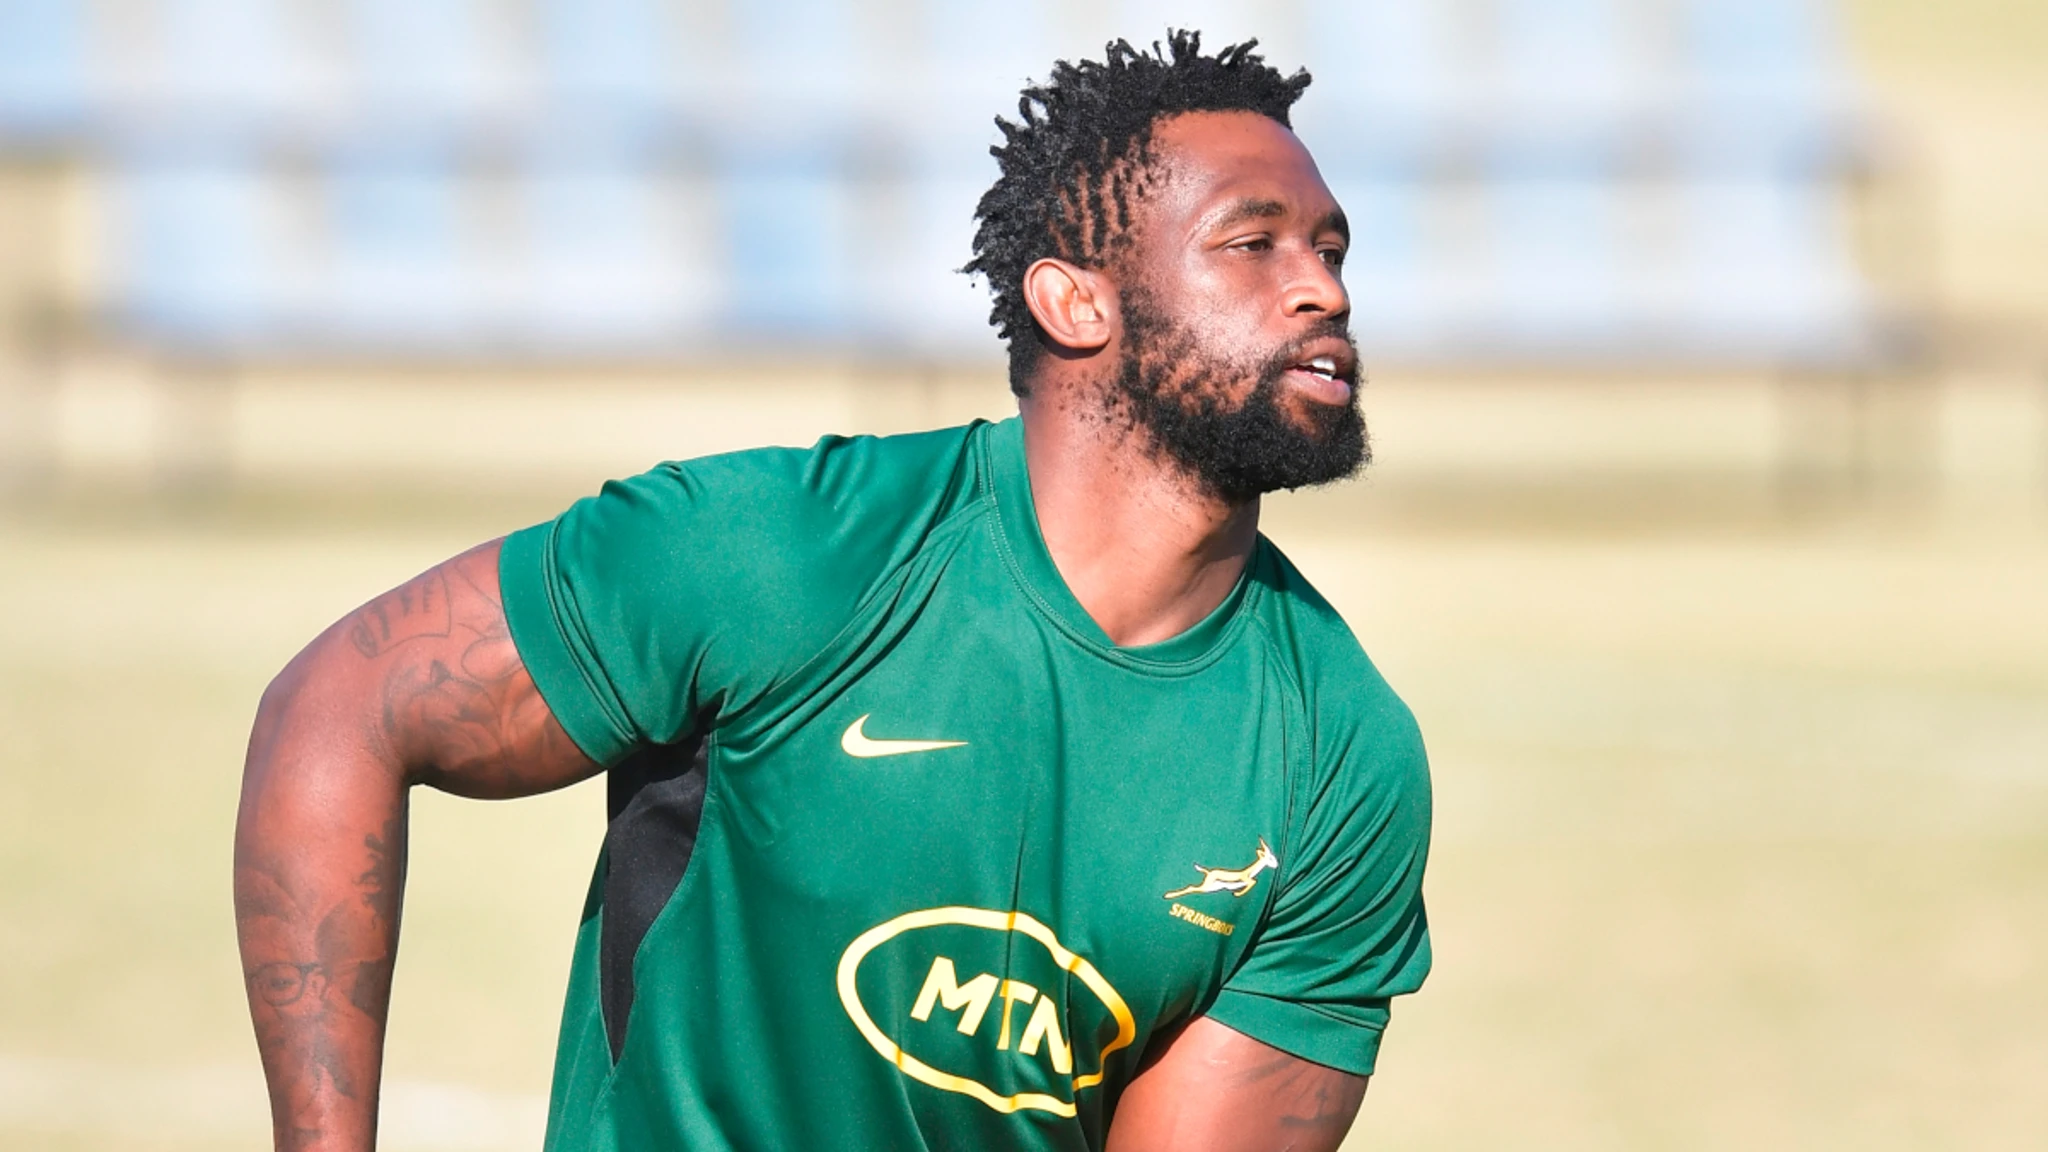 Springboks delighted to have captain Kolisi back after injury